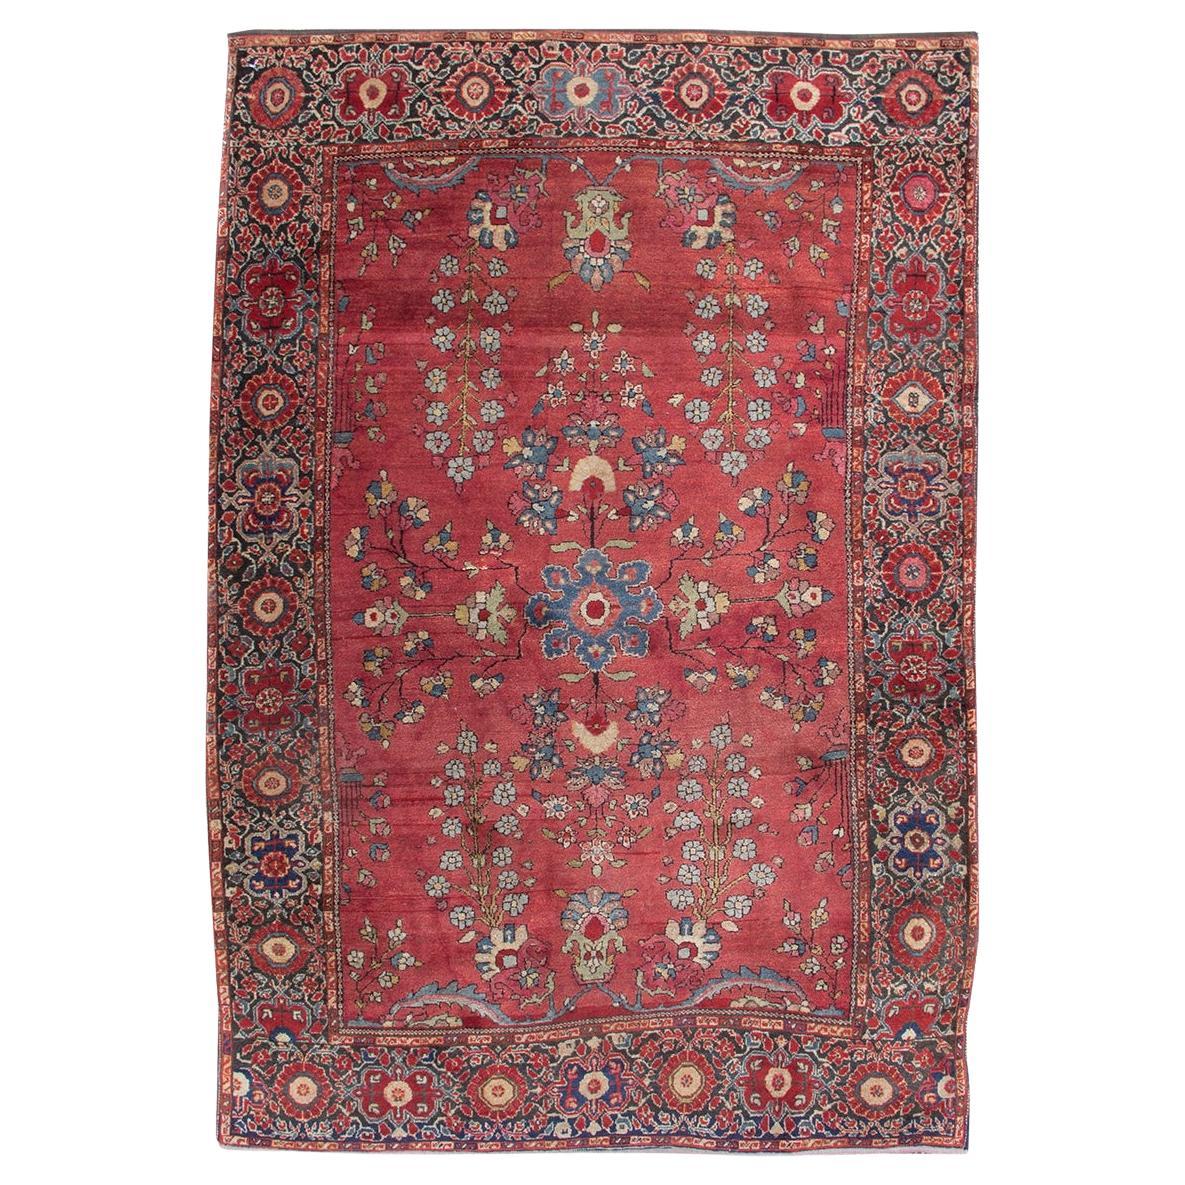 Antique Persian Fereghan Sarouk Rug, Early 20th Century For Sale